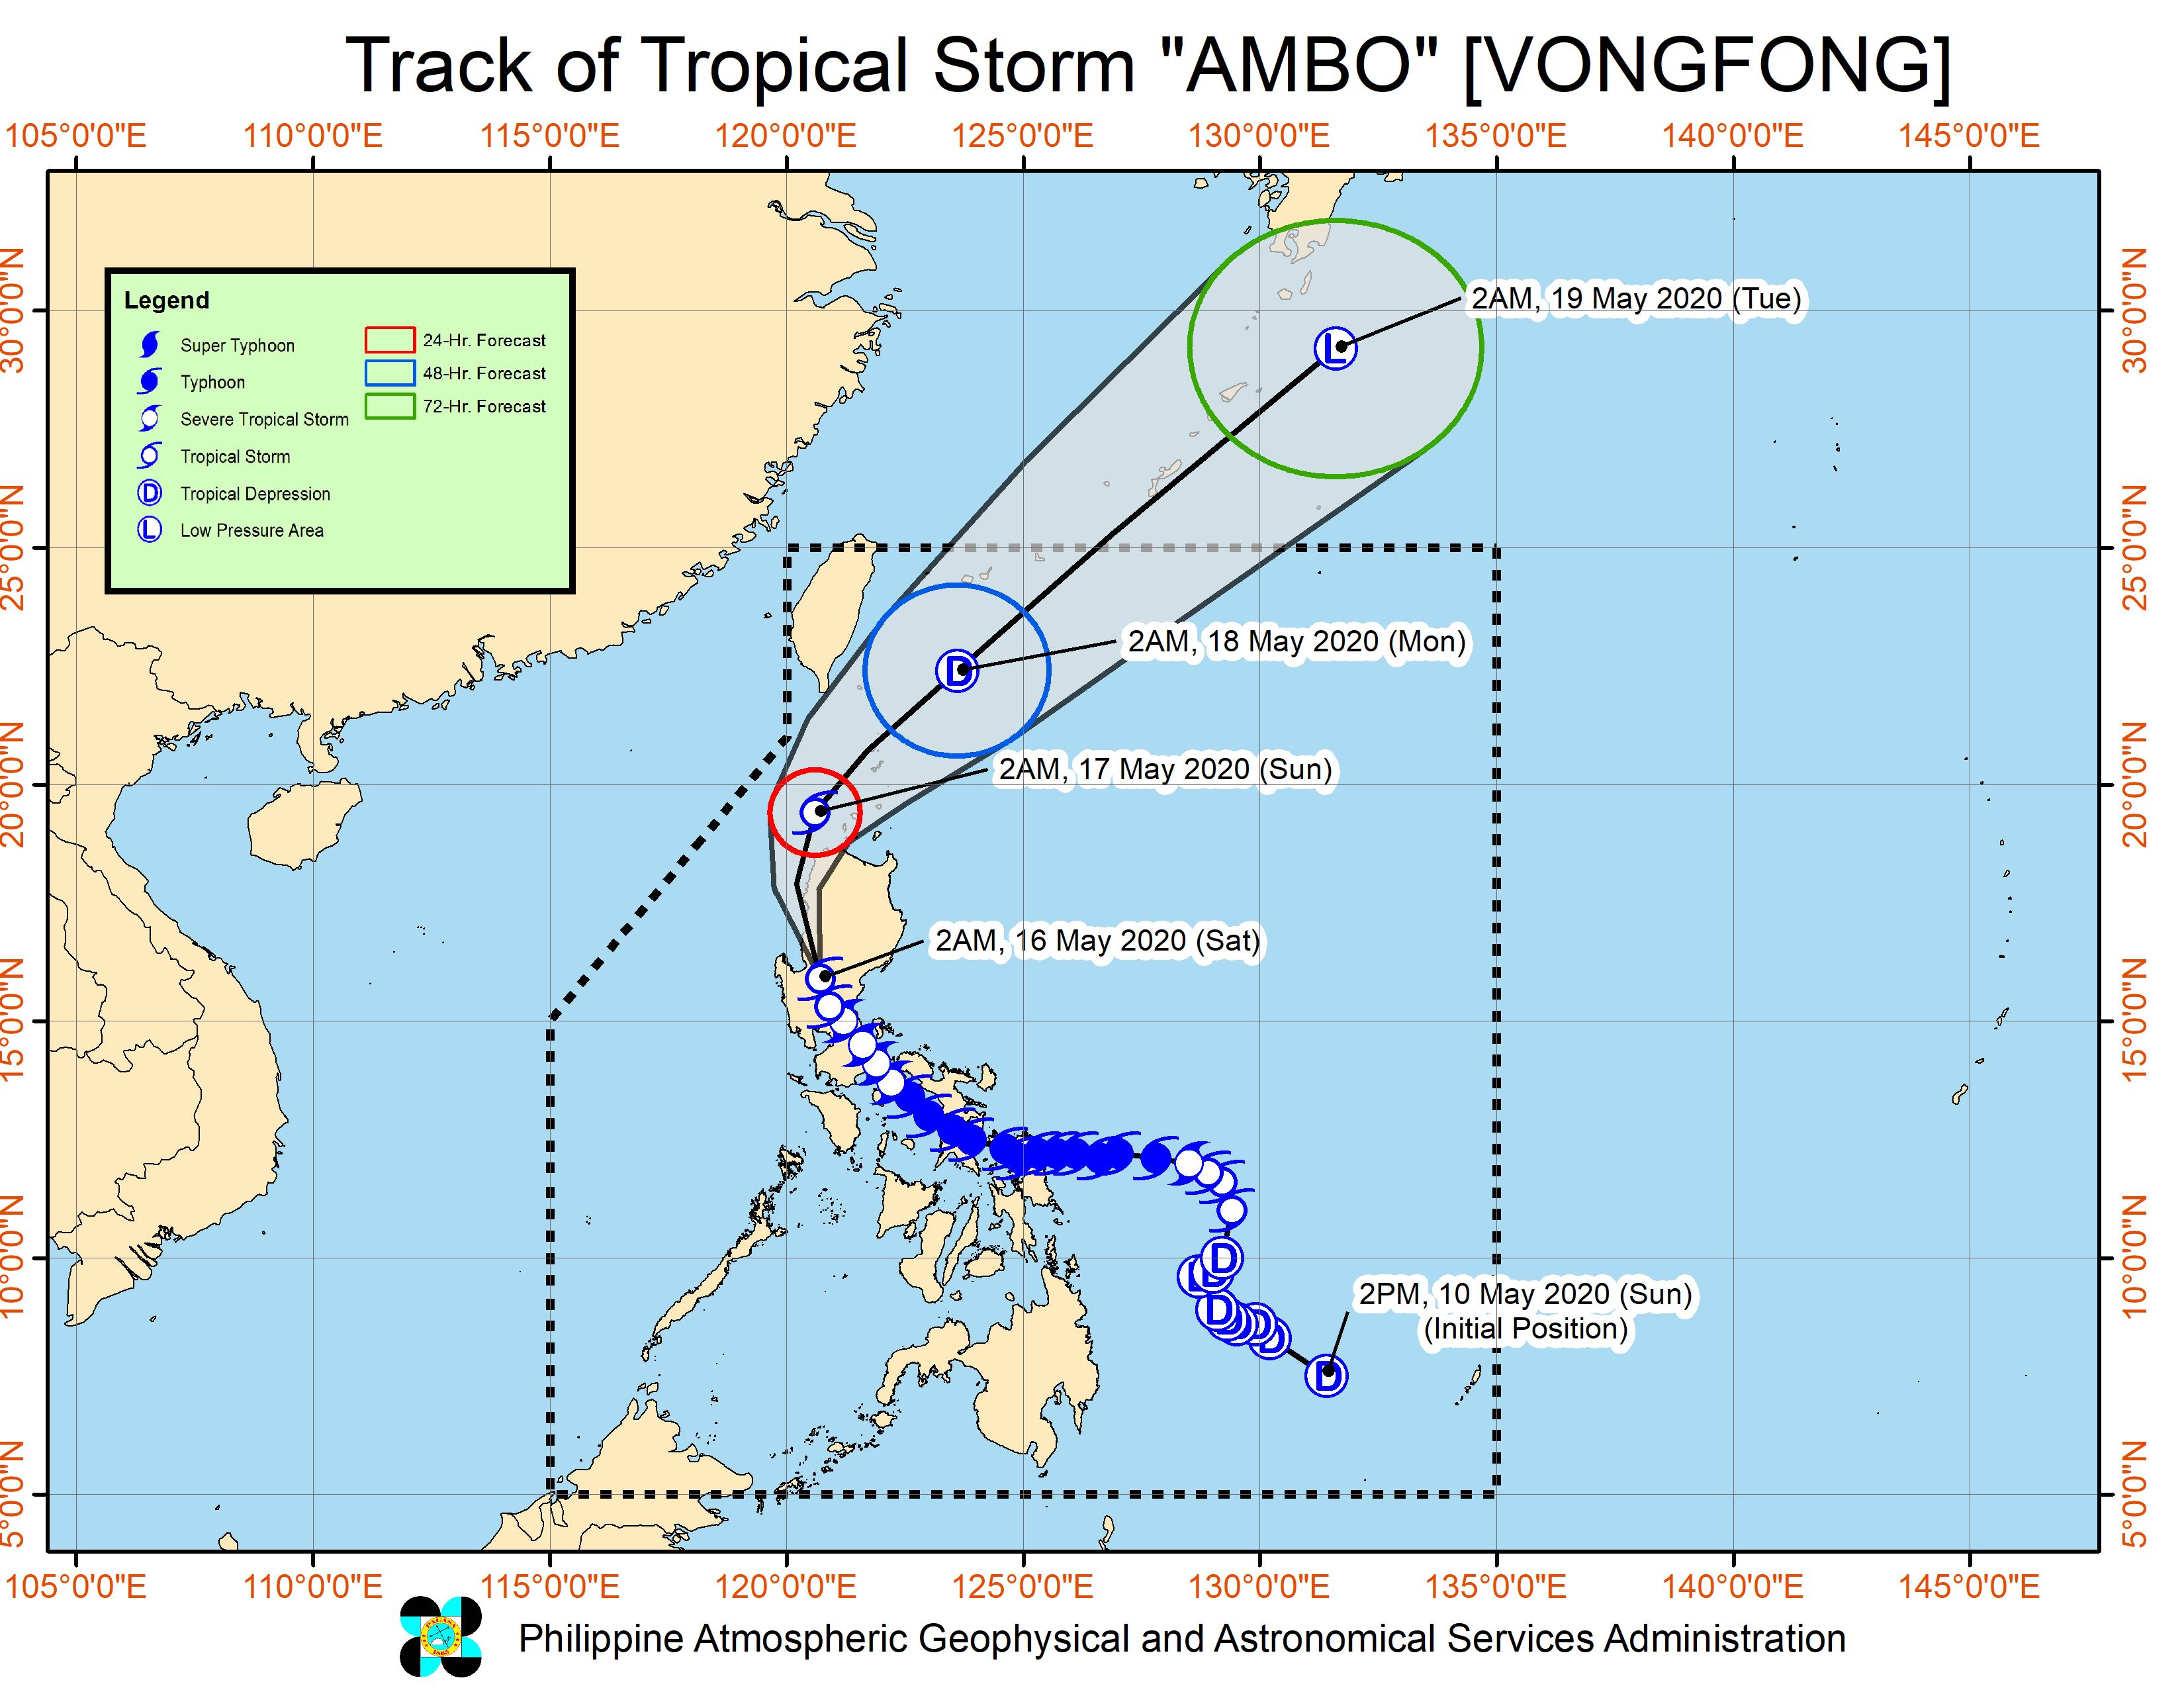 Forecast track of Tropical Storm Ambo (Vongfong) as of May 16, 2020, 5 am. Image from PAGASA 